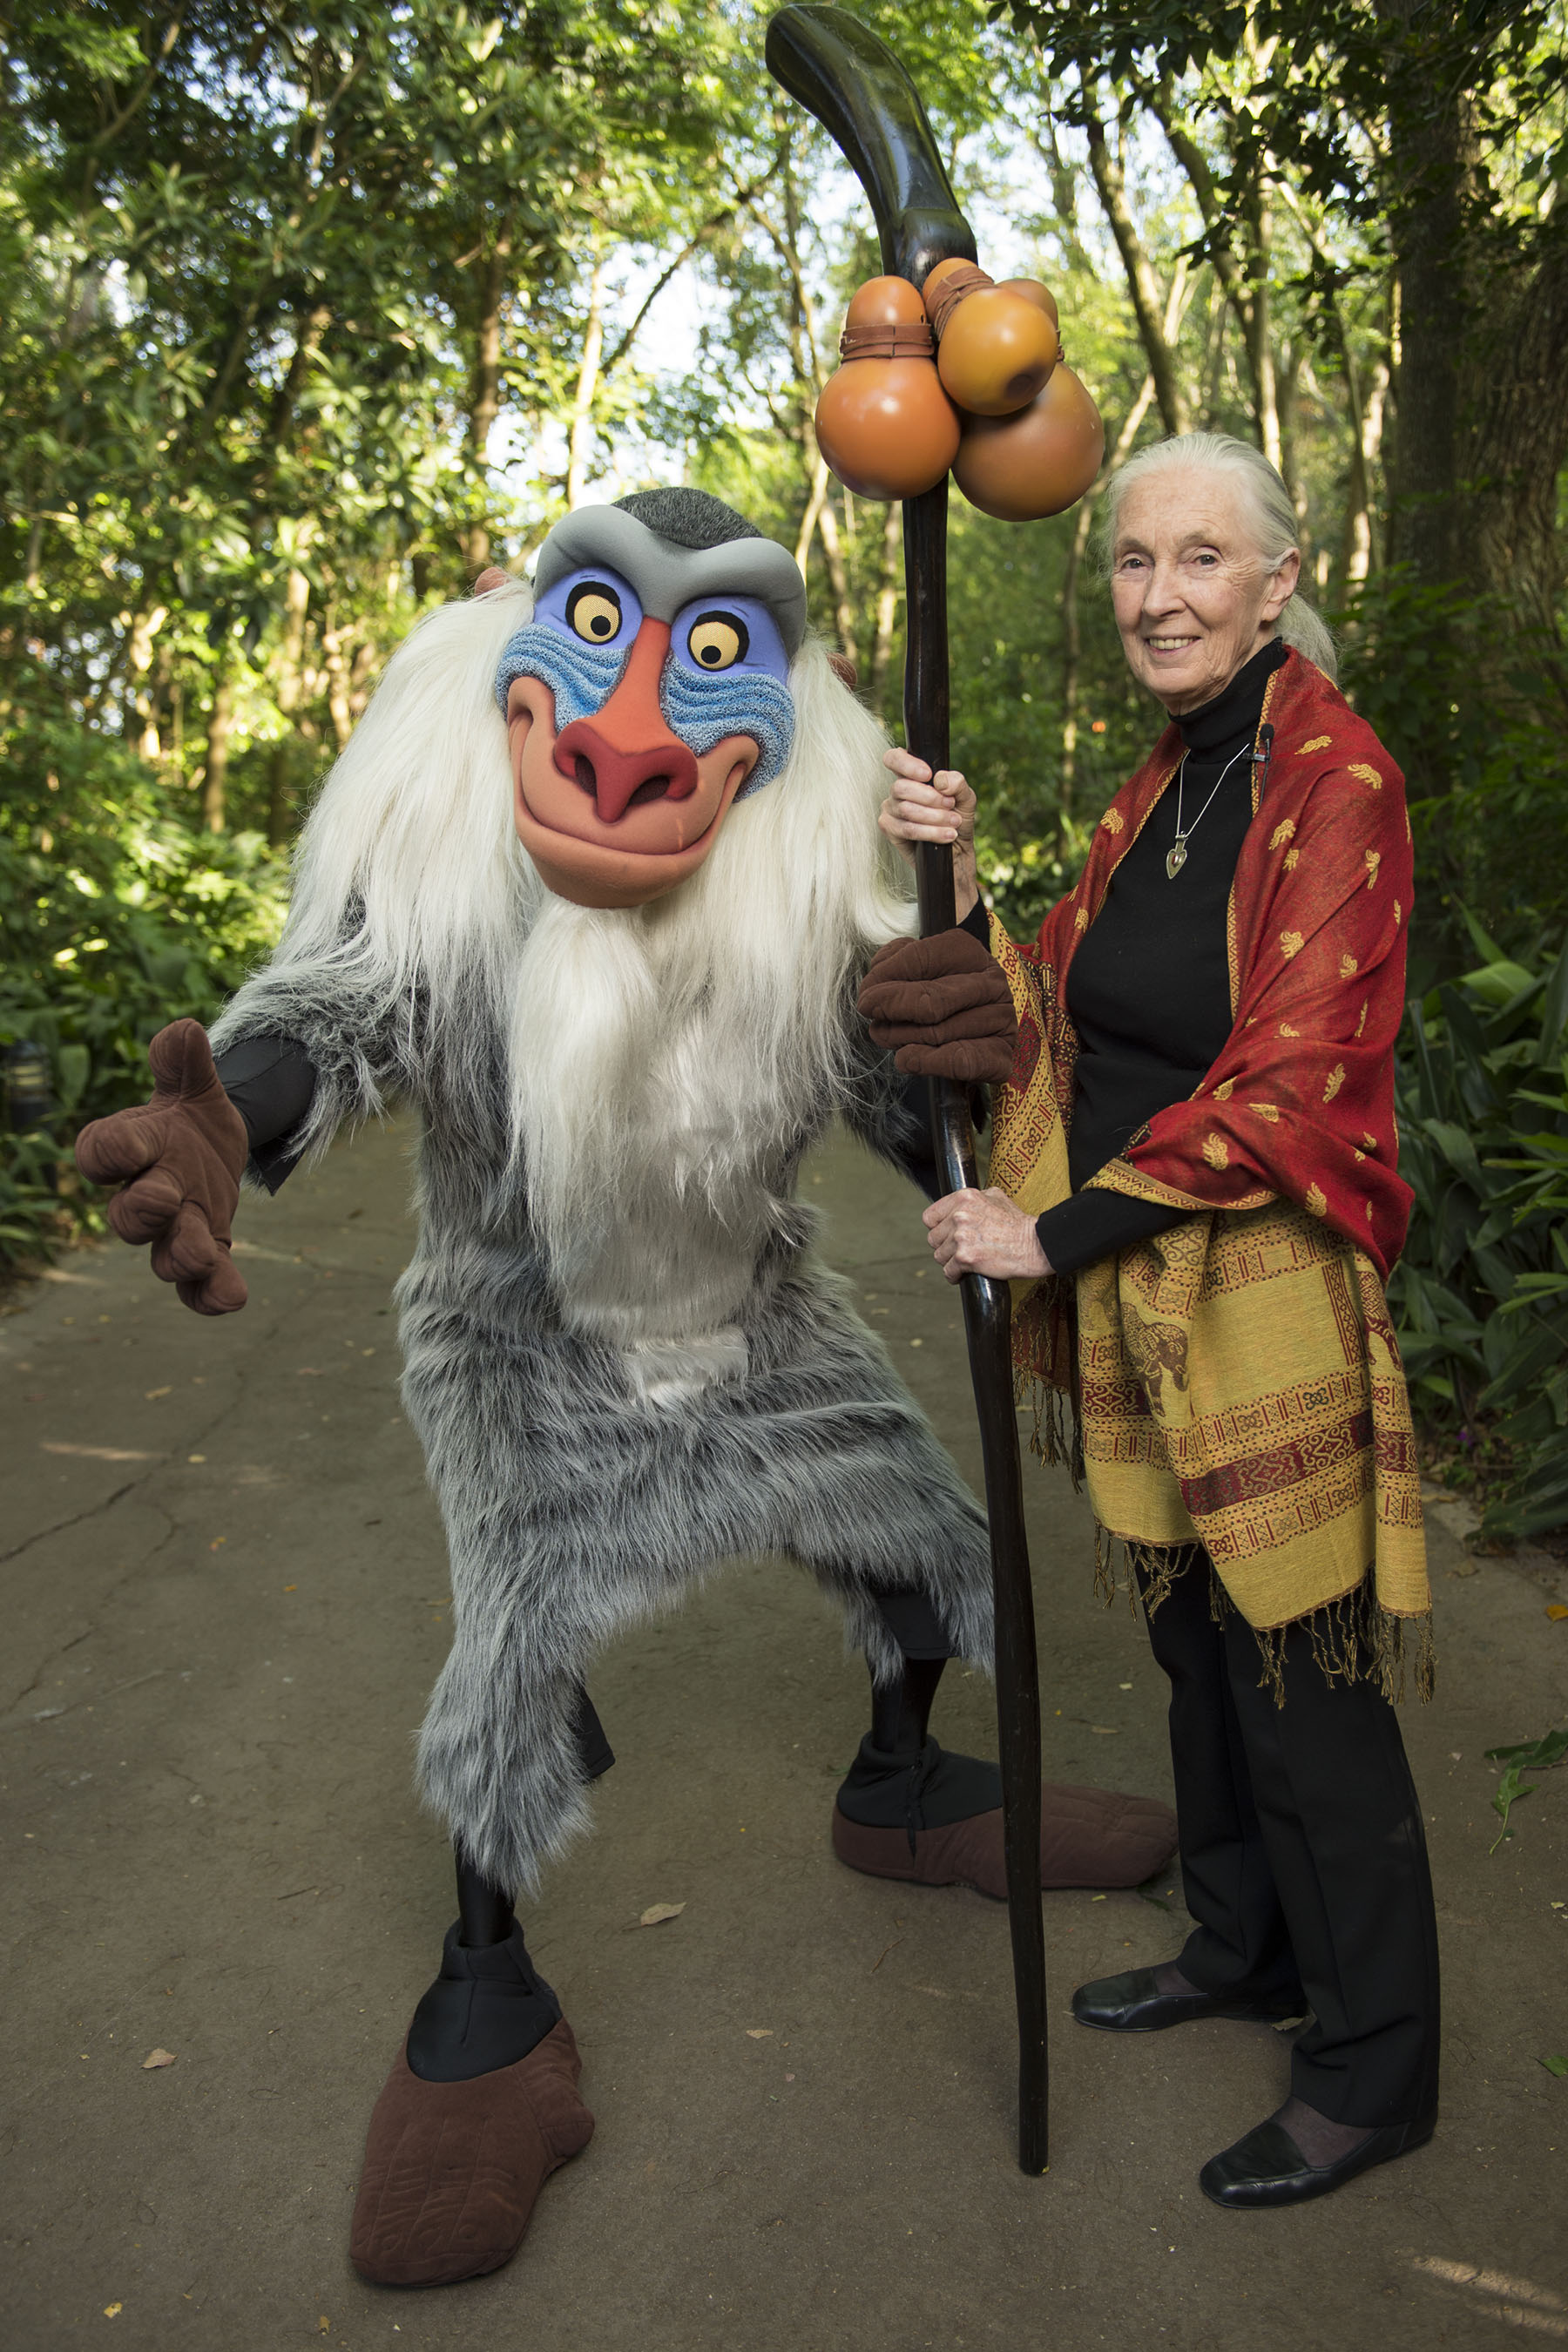 Dr. Jane Goodall poses with Rafiki April 19, 2016 at Disney's Animal Kingdom. Dr. Goodall was visiting Disney's Animal Kingdom to celebrate the 20th anniversary of the Disney Conservation Fund and support the launch of its new initiative called "Reverse the Decline, Increase the Time" which aims to reverse the decline of threatened species through scientific research and increasing the time kids spend in nature. (David Roark, photographer)